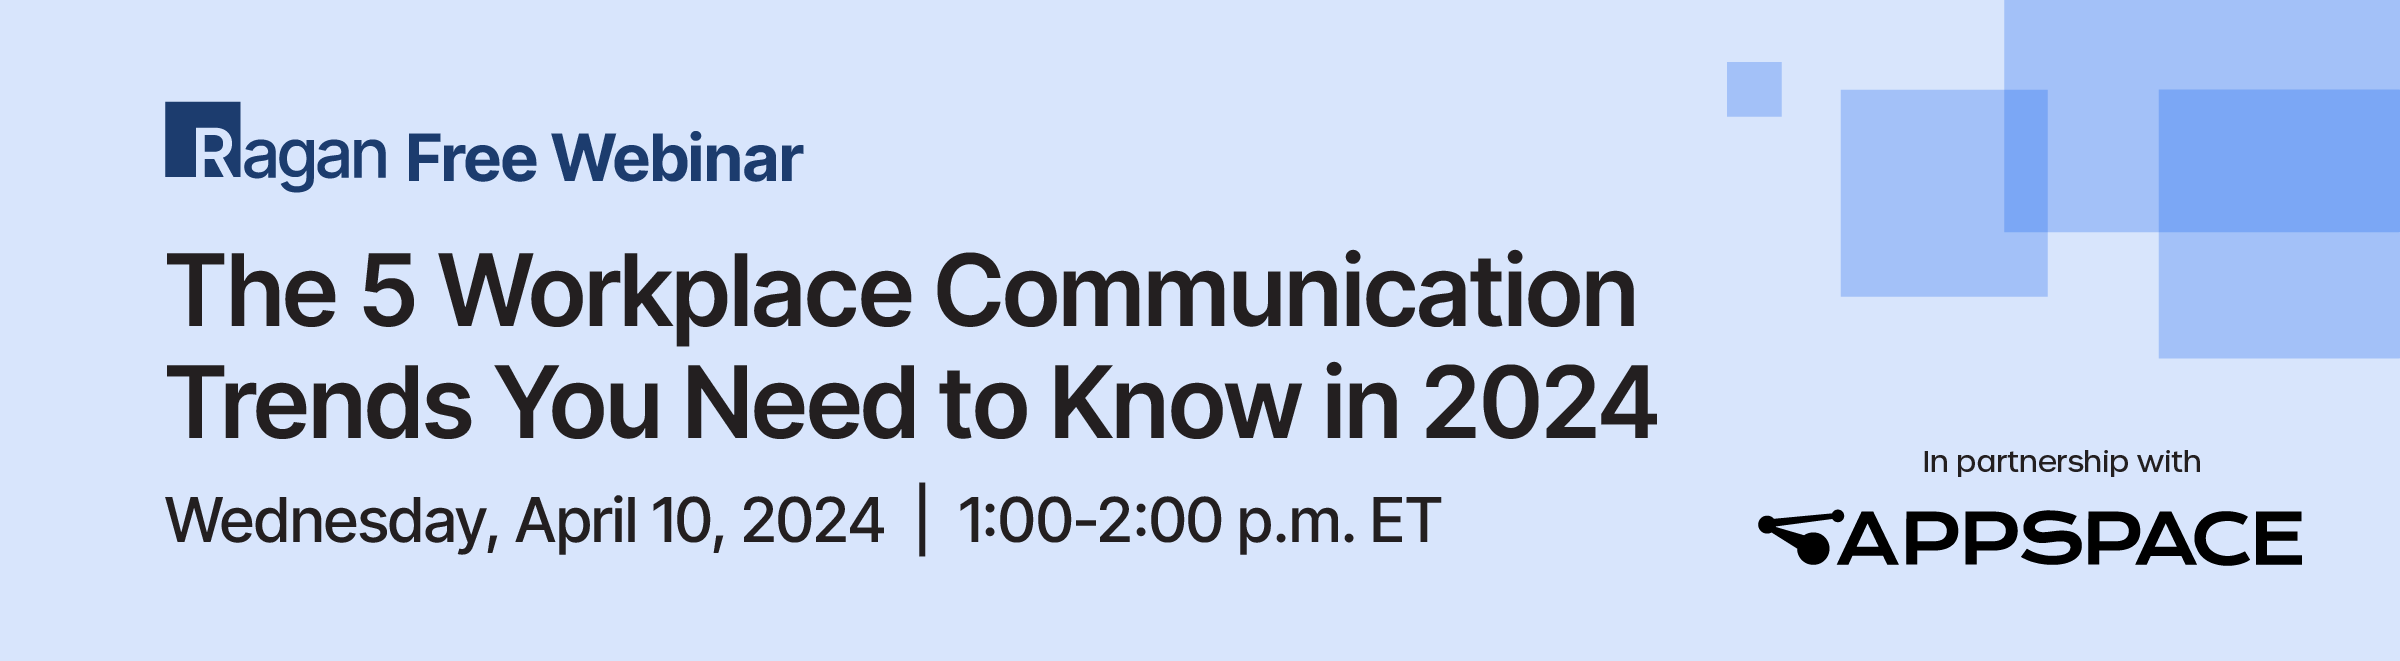 Presentation Handouts For: Y24APPSPACE240410 - The 5 Workplace Communication Trends You Need to Know in 2024